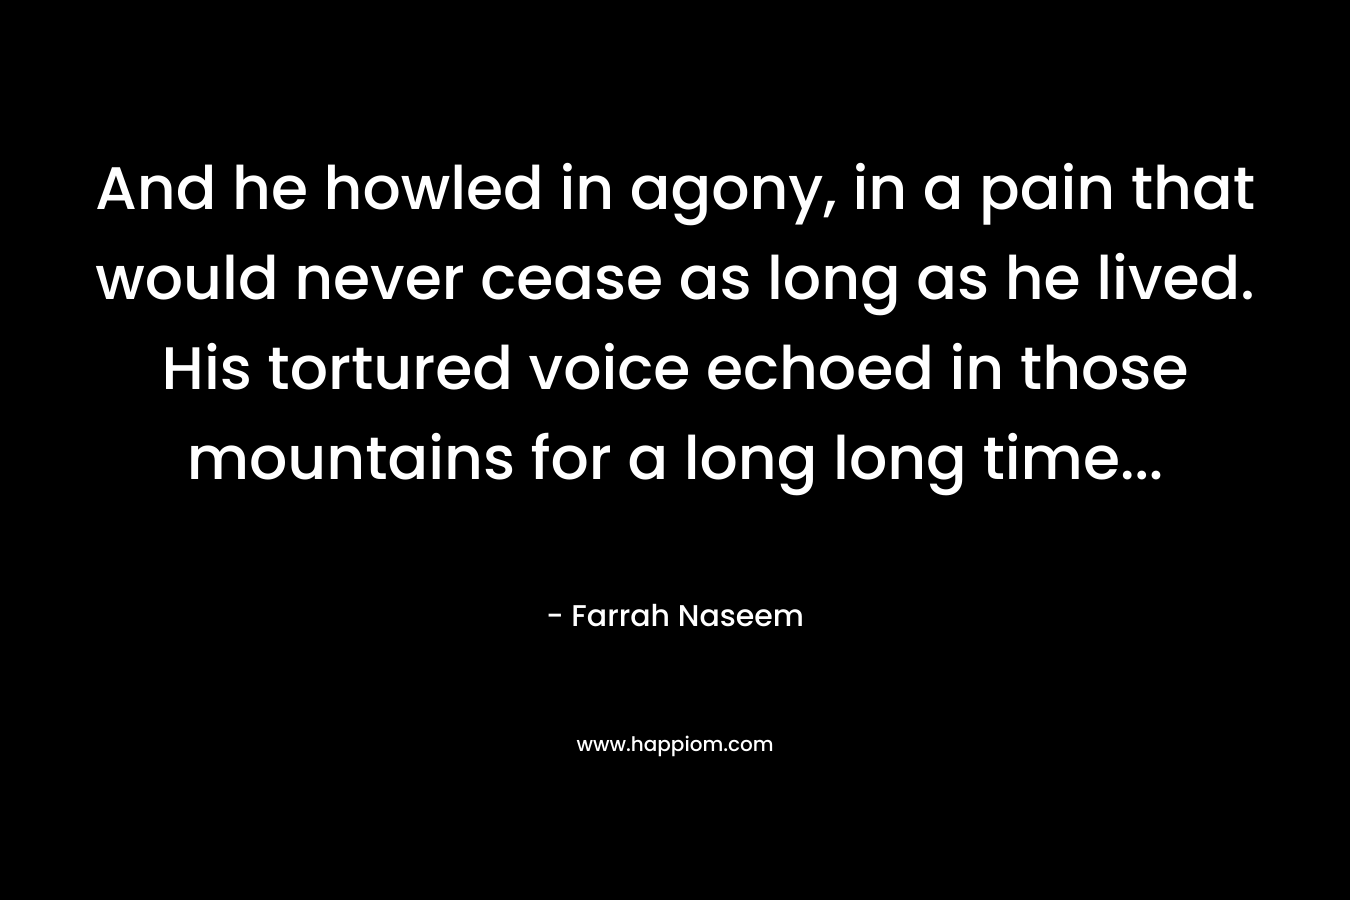 And he howled in agony, in a pain that would never cease as long as he lived. His tortured voice echoed in those mountains for a long long time… – Farrah Naseem